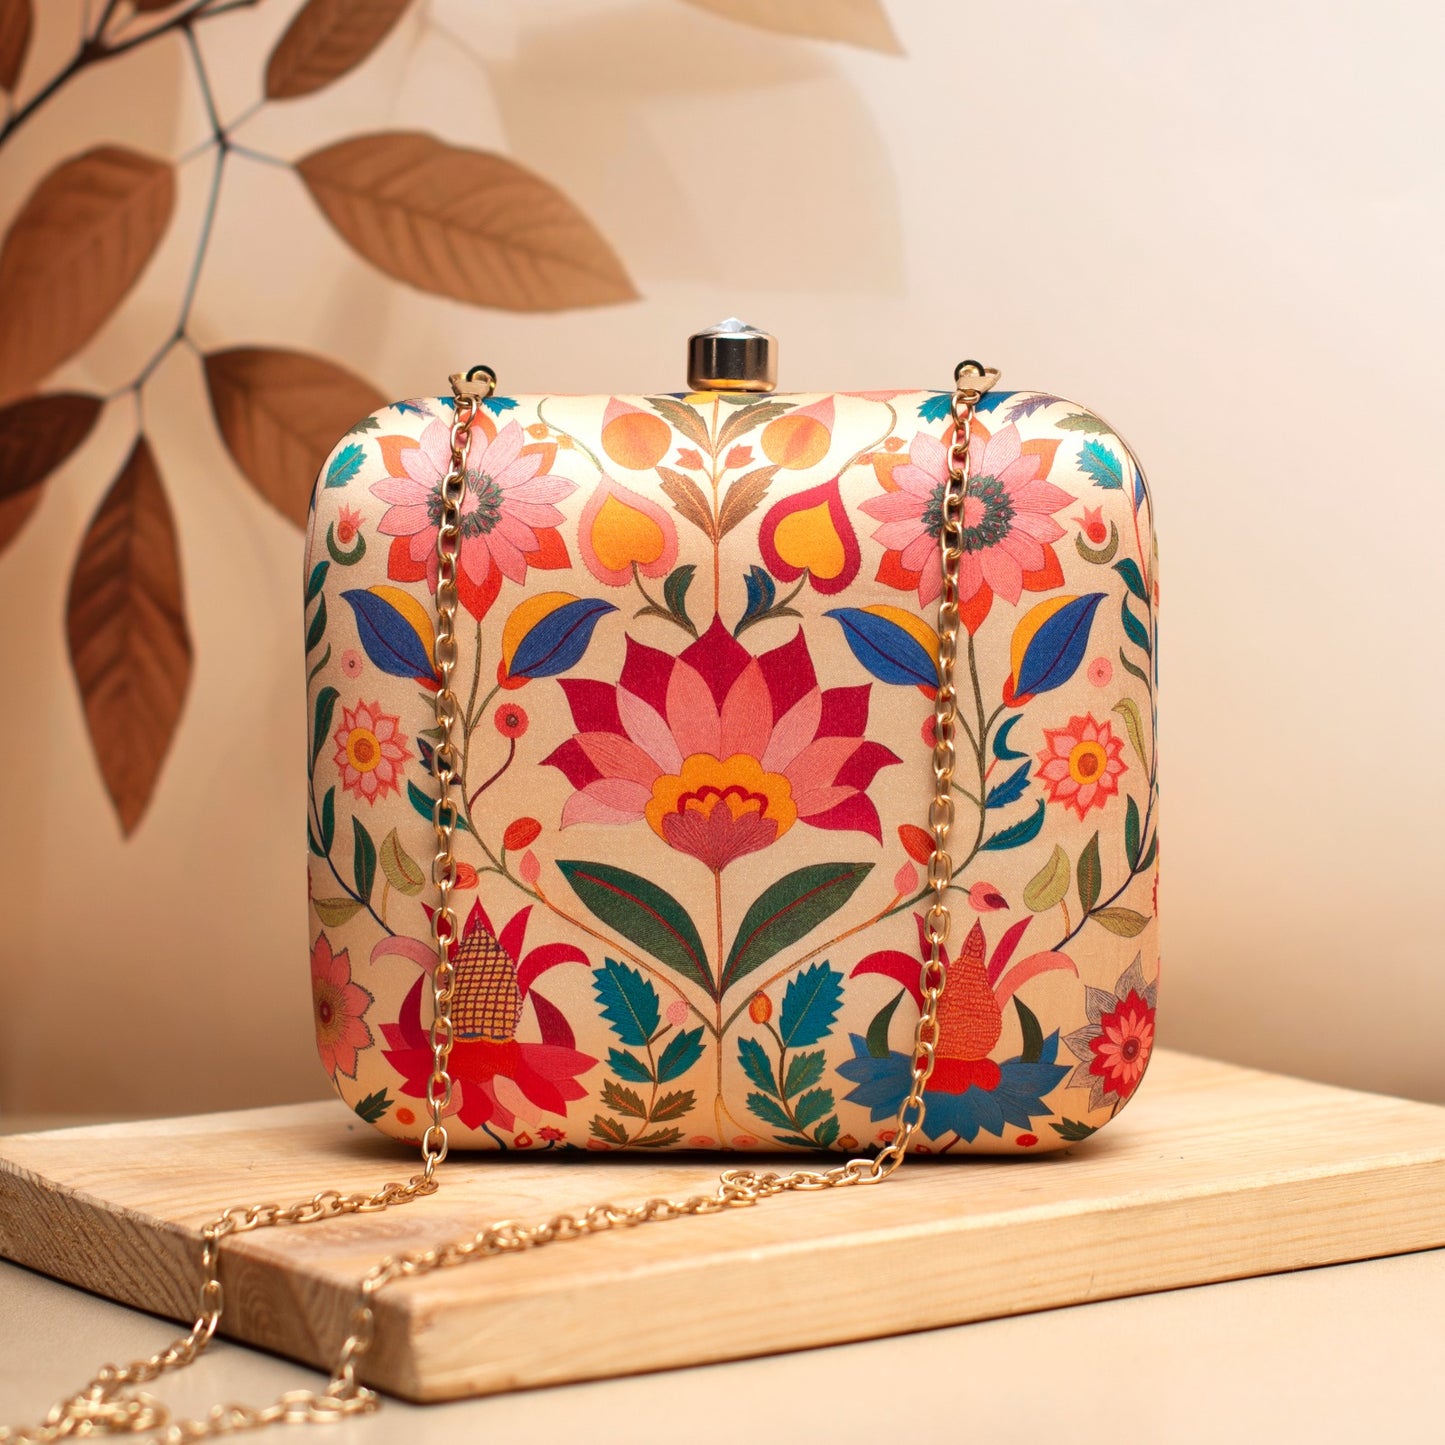 Lotus printed fabric square clutch with push button